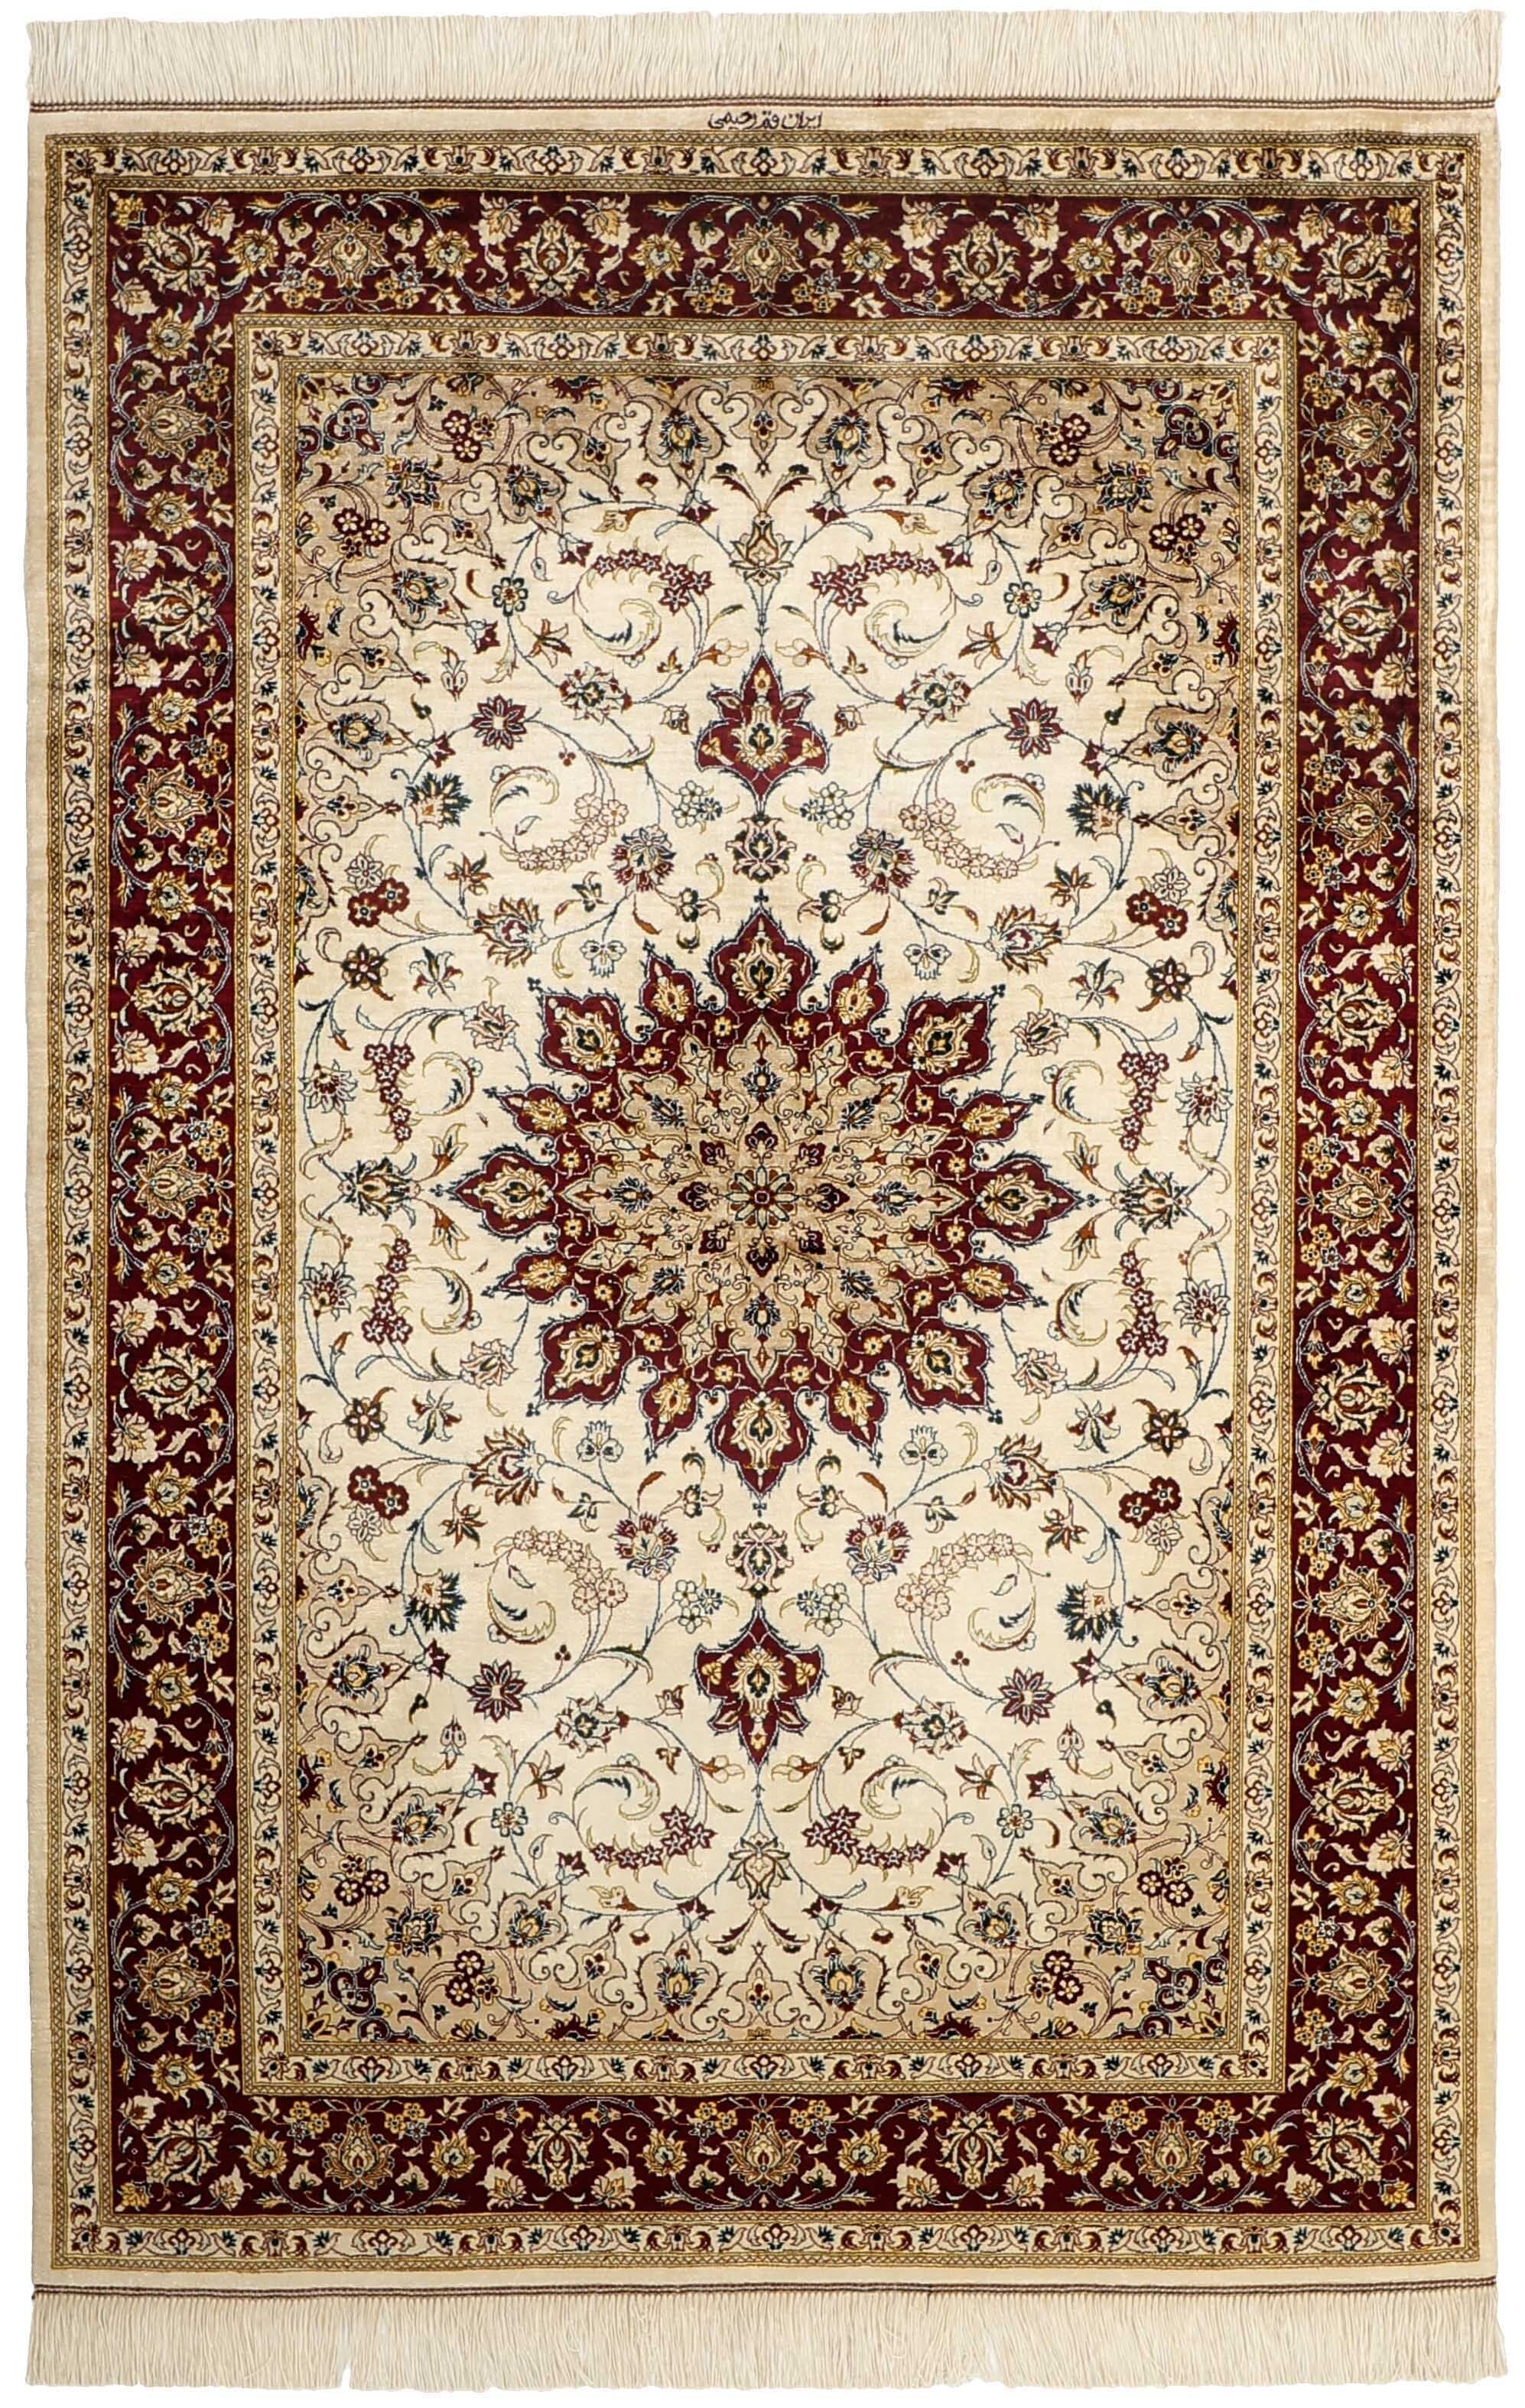 Authentic persian rug with a traditional floral design in beige